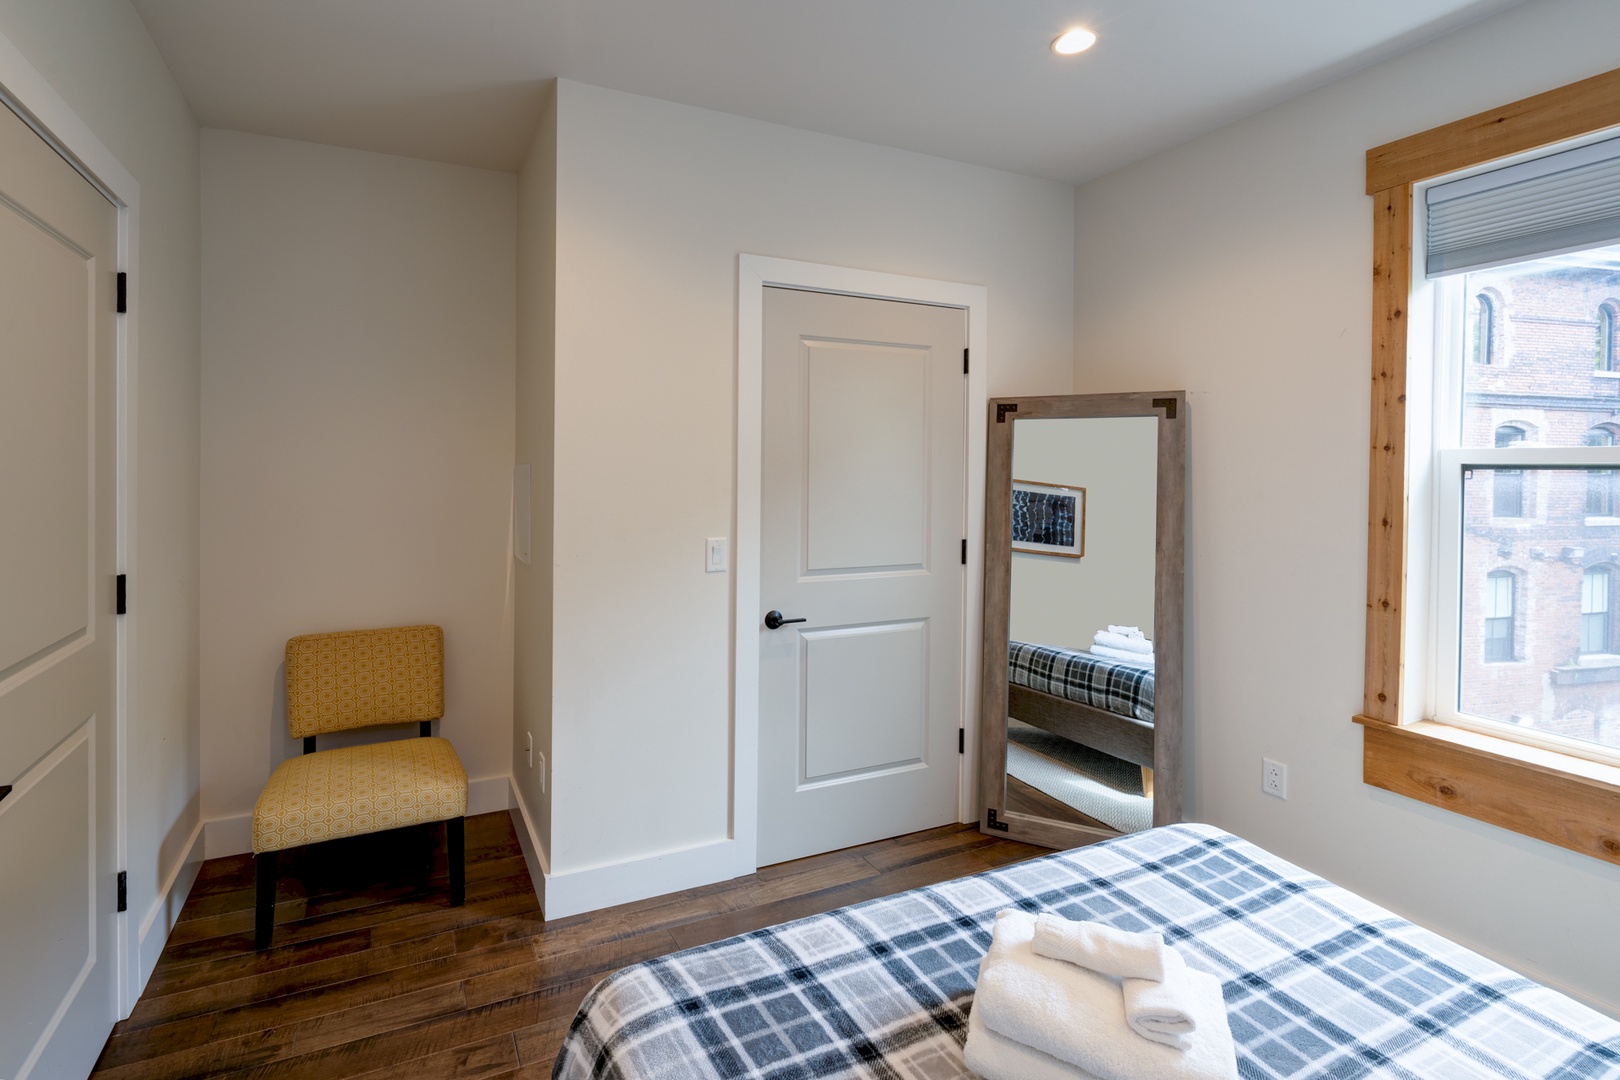 After a day exploring the Music City, retreat to your very own queen bedroom